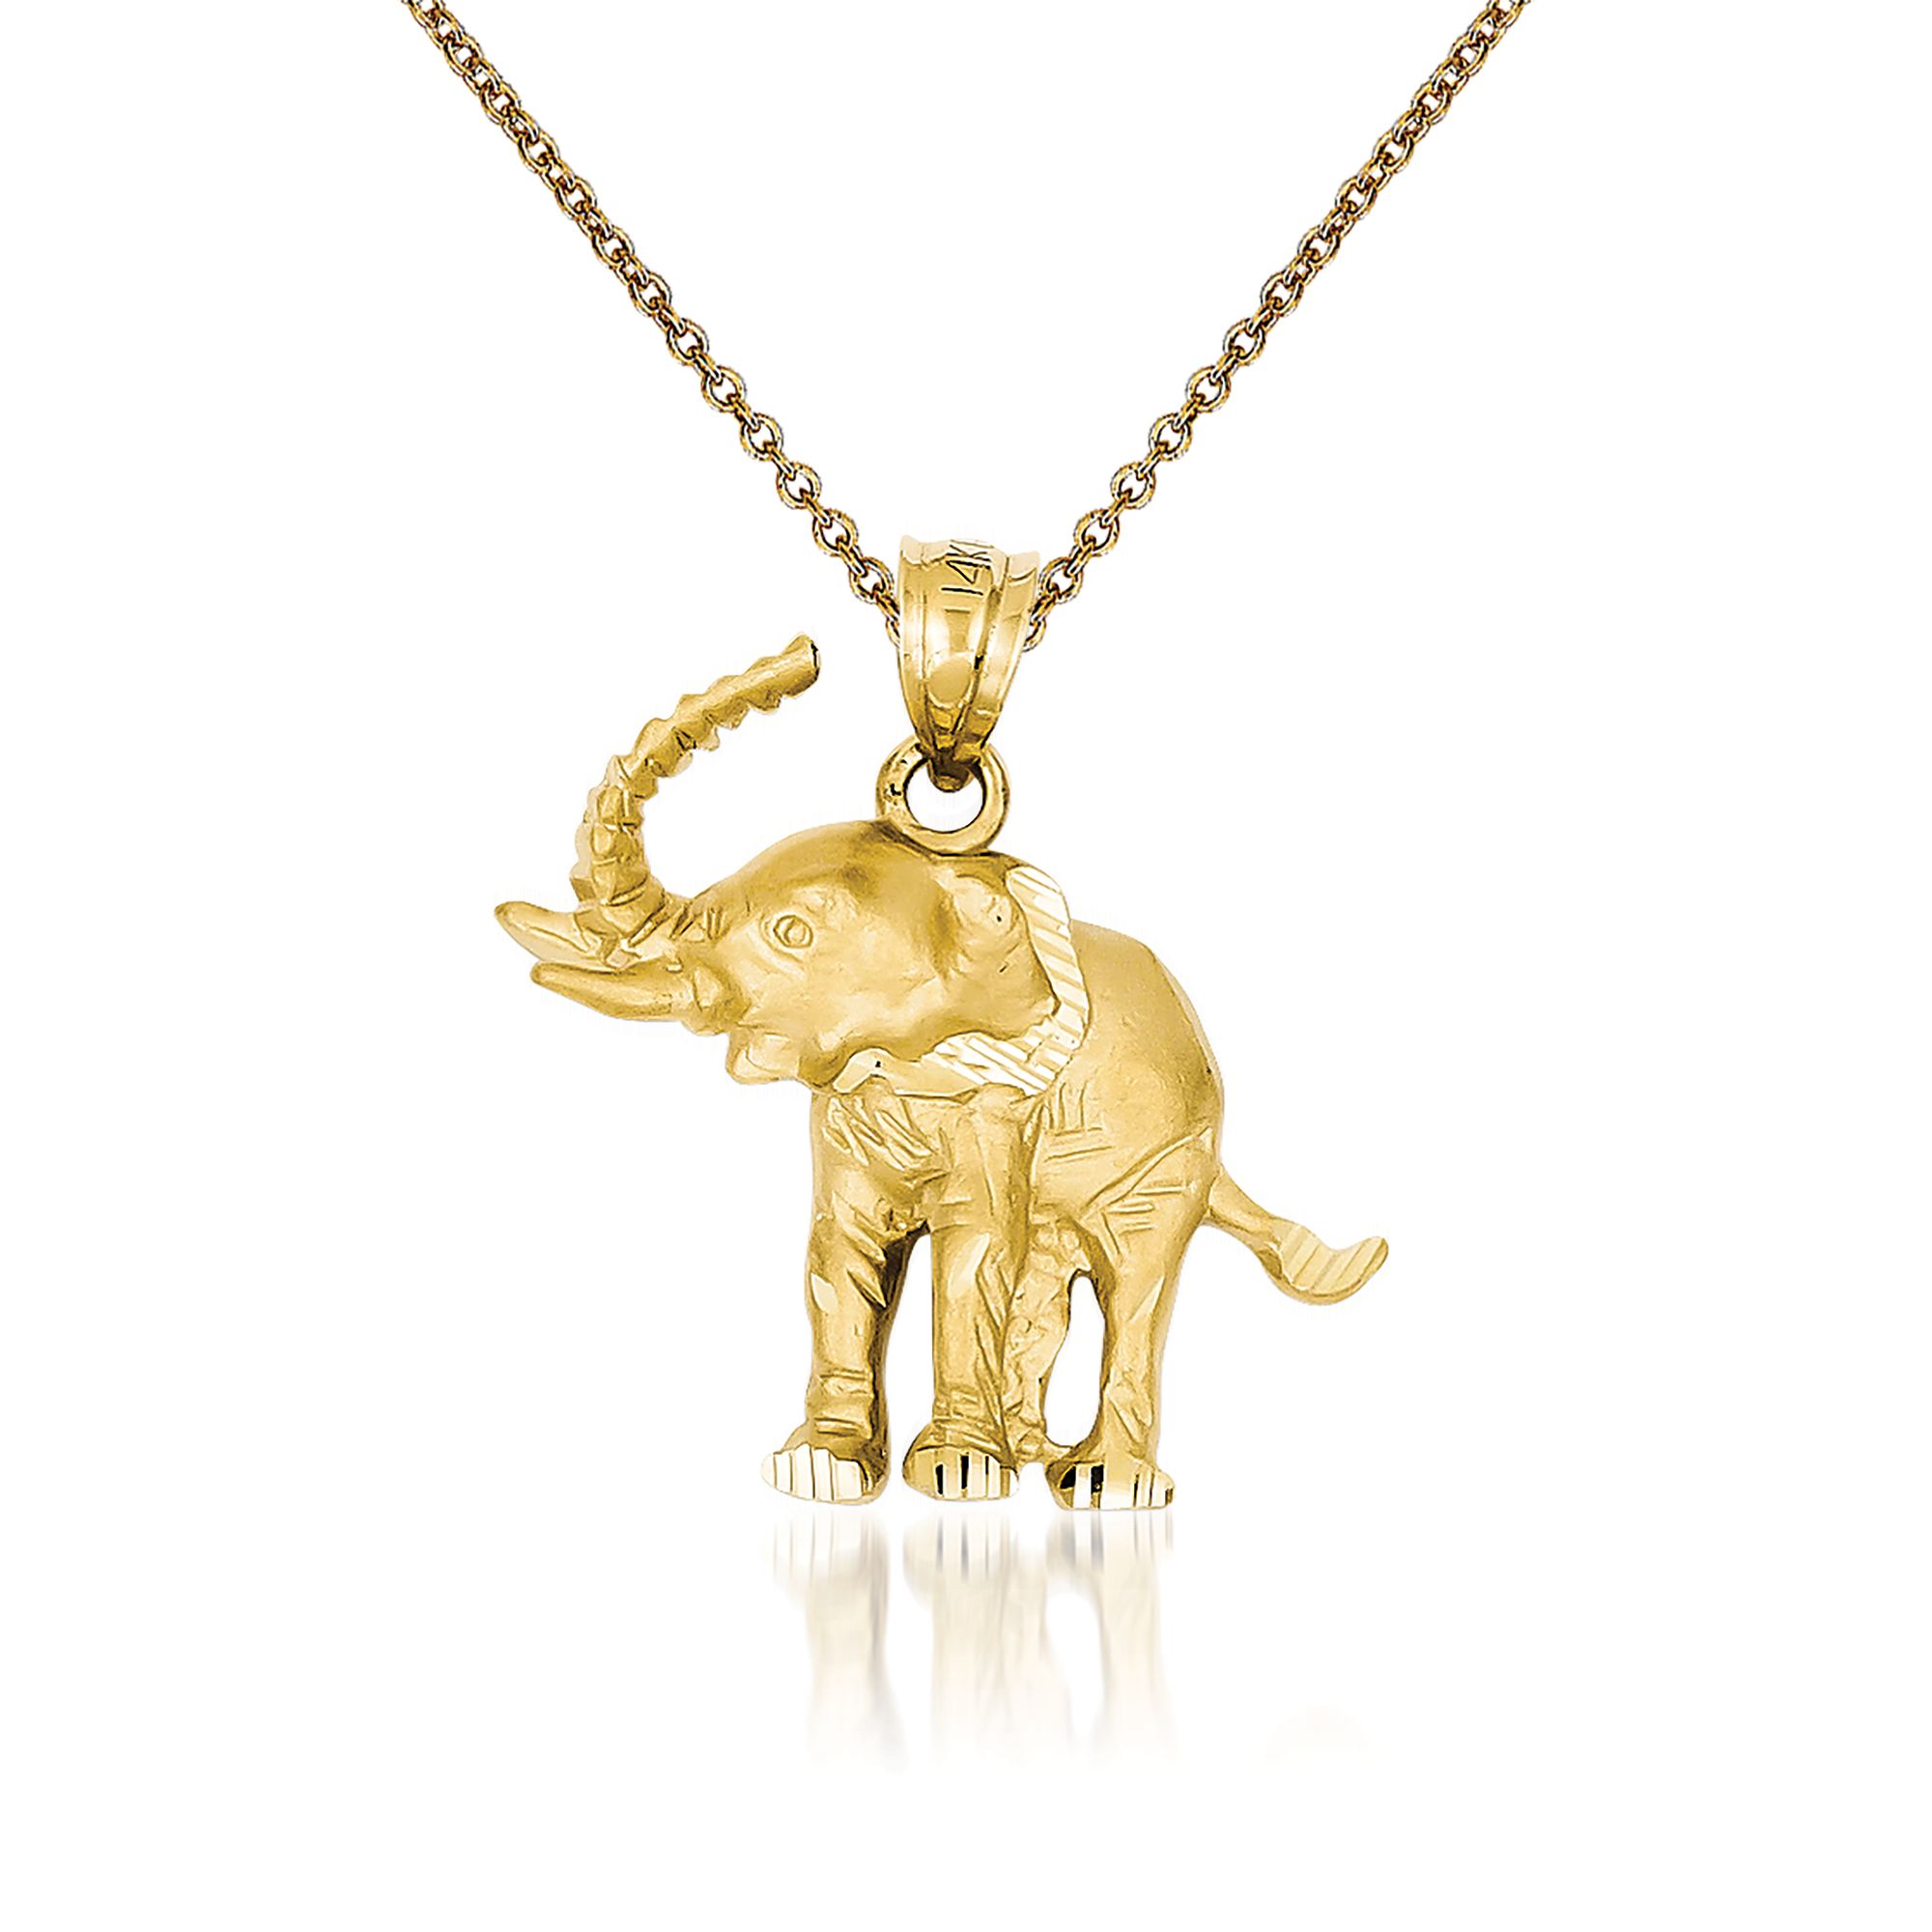 Heart Shape Emerald Elephant Pendant Necklace 14K Yellow Gold Over Sterling